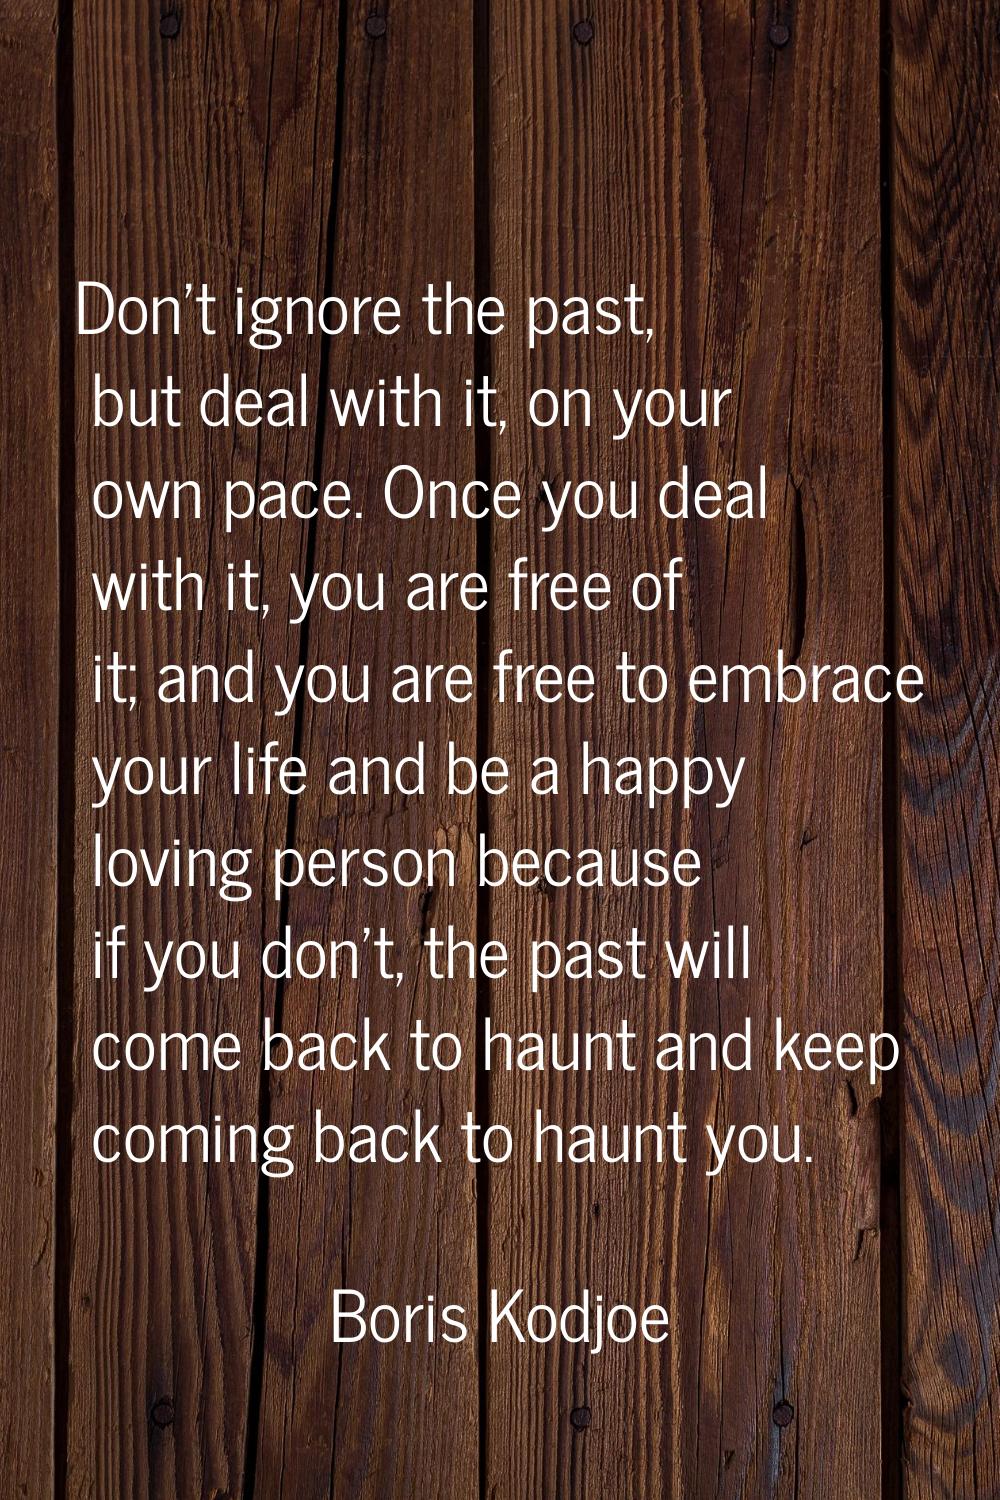 Don't ignore the past, but deal with it, on your own pace. Once you deal with it, you are free of i